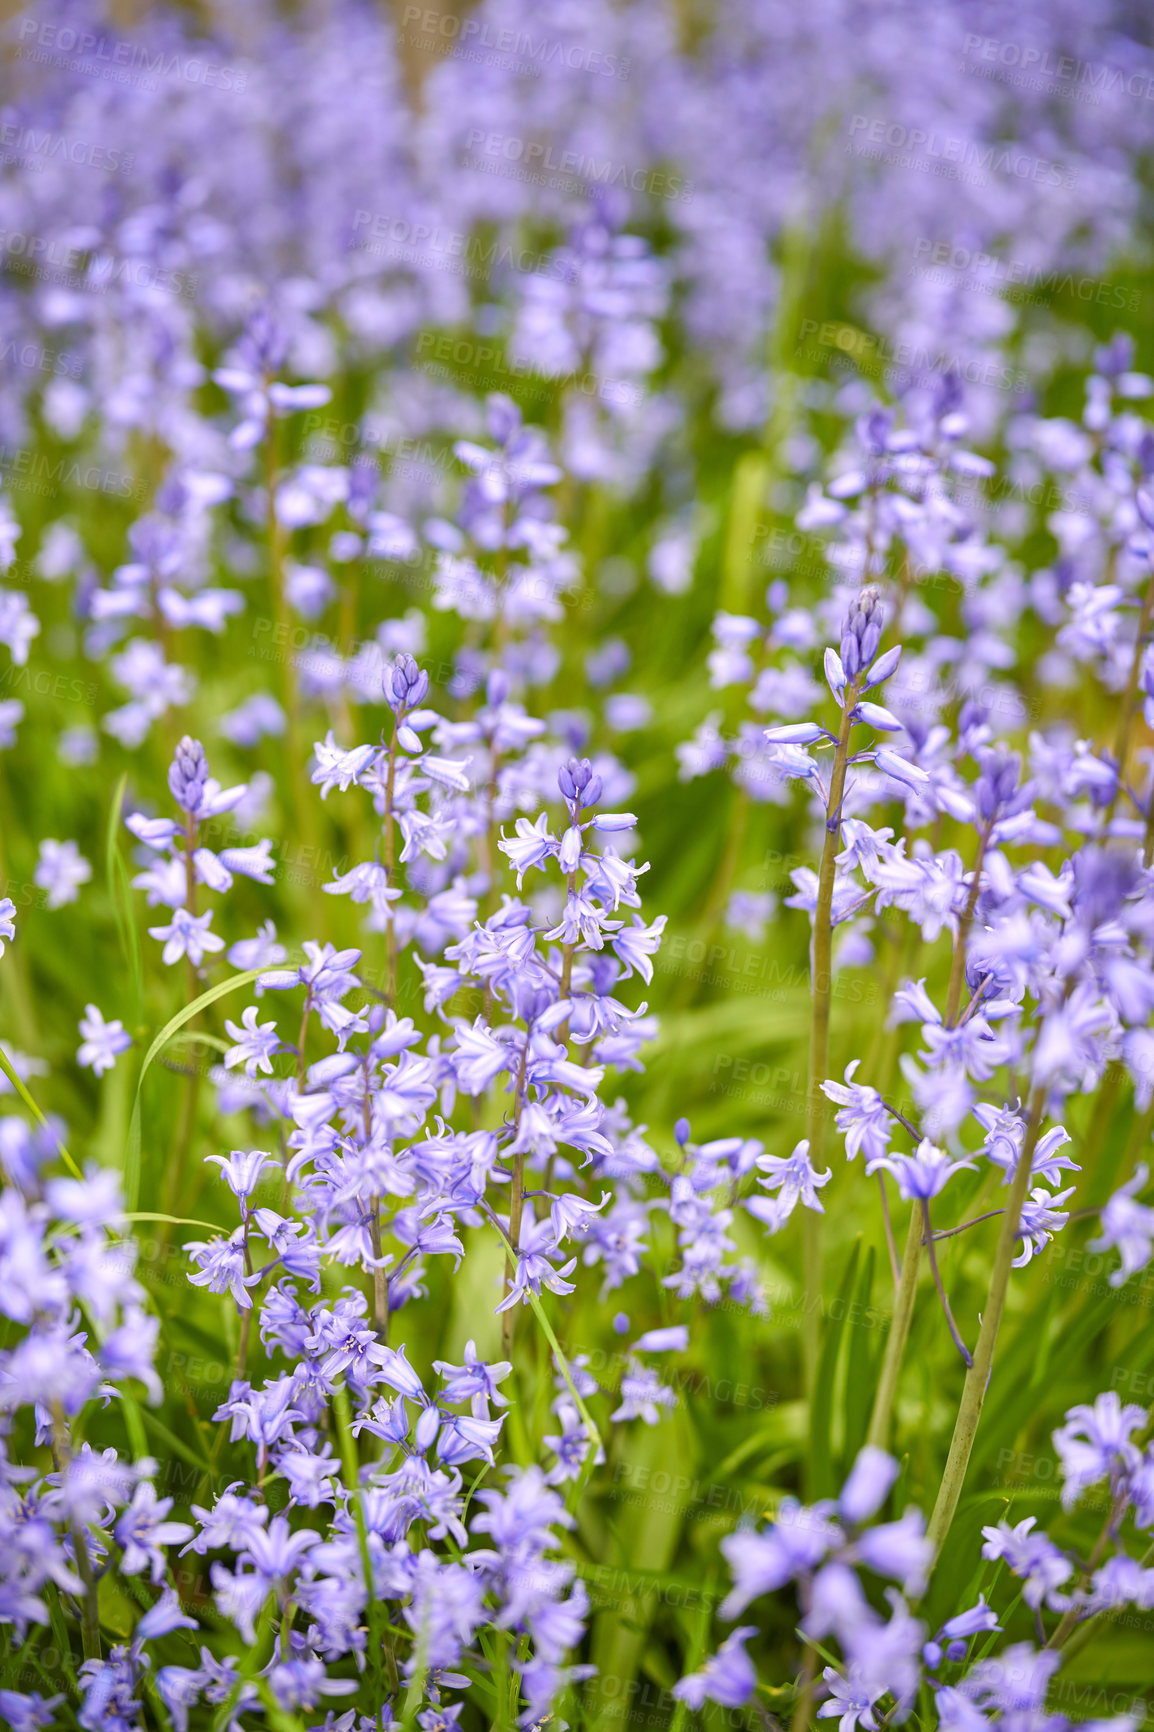 Buy stock photo Closeup of common bluebell flowers growing and flowering on green stems in remote field, meadow or home garden. Textured detail of backyard blue kent bell or campanula plants blossoming and blooming